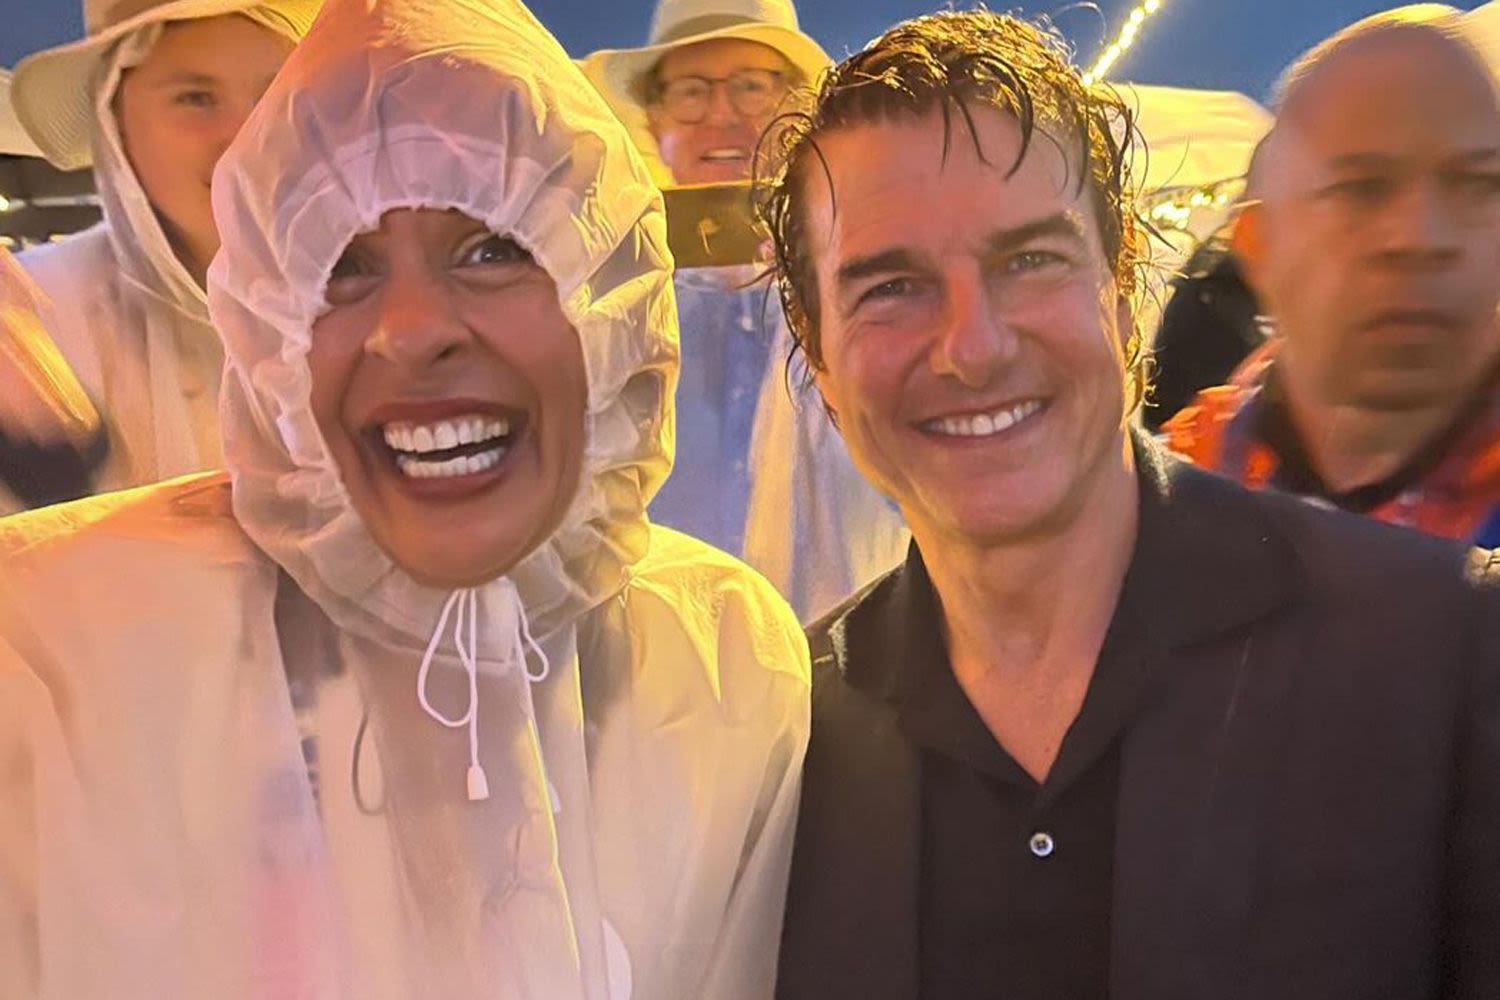 Hoda Kotb Rocks a Wet Poncho — and a Huge Grin — While Meeting Tom Cruise for the First Time at the Olympics